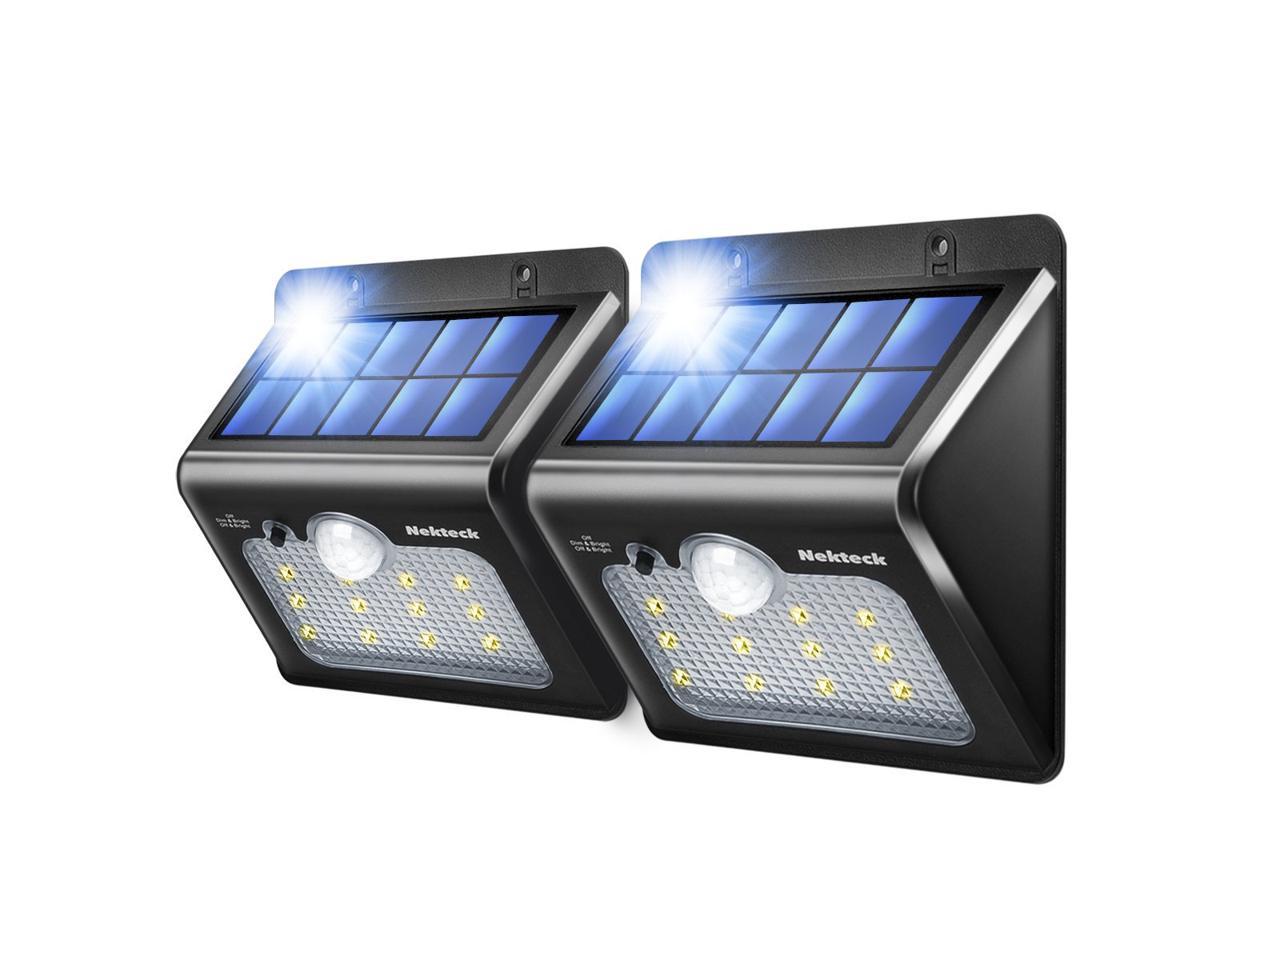 2x 118LED Solar Lights Outdoor Motion Sensor Security Wall Lighting Dusk To Down 